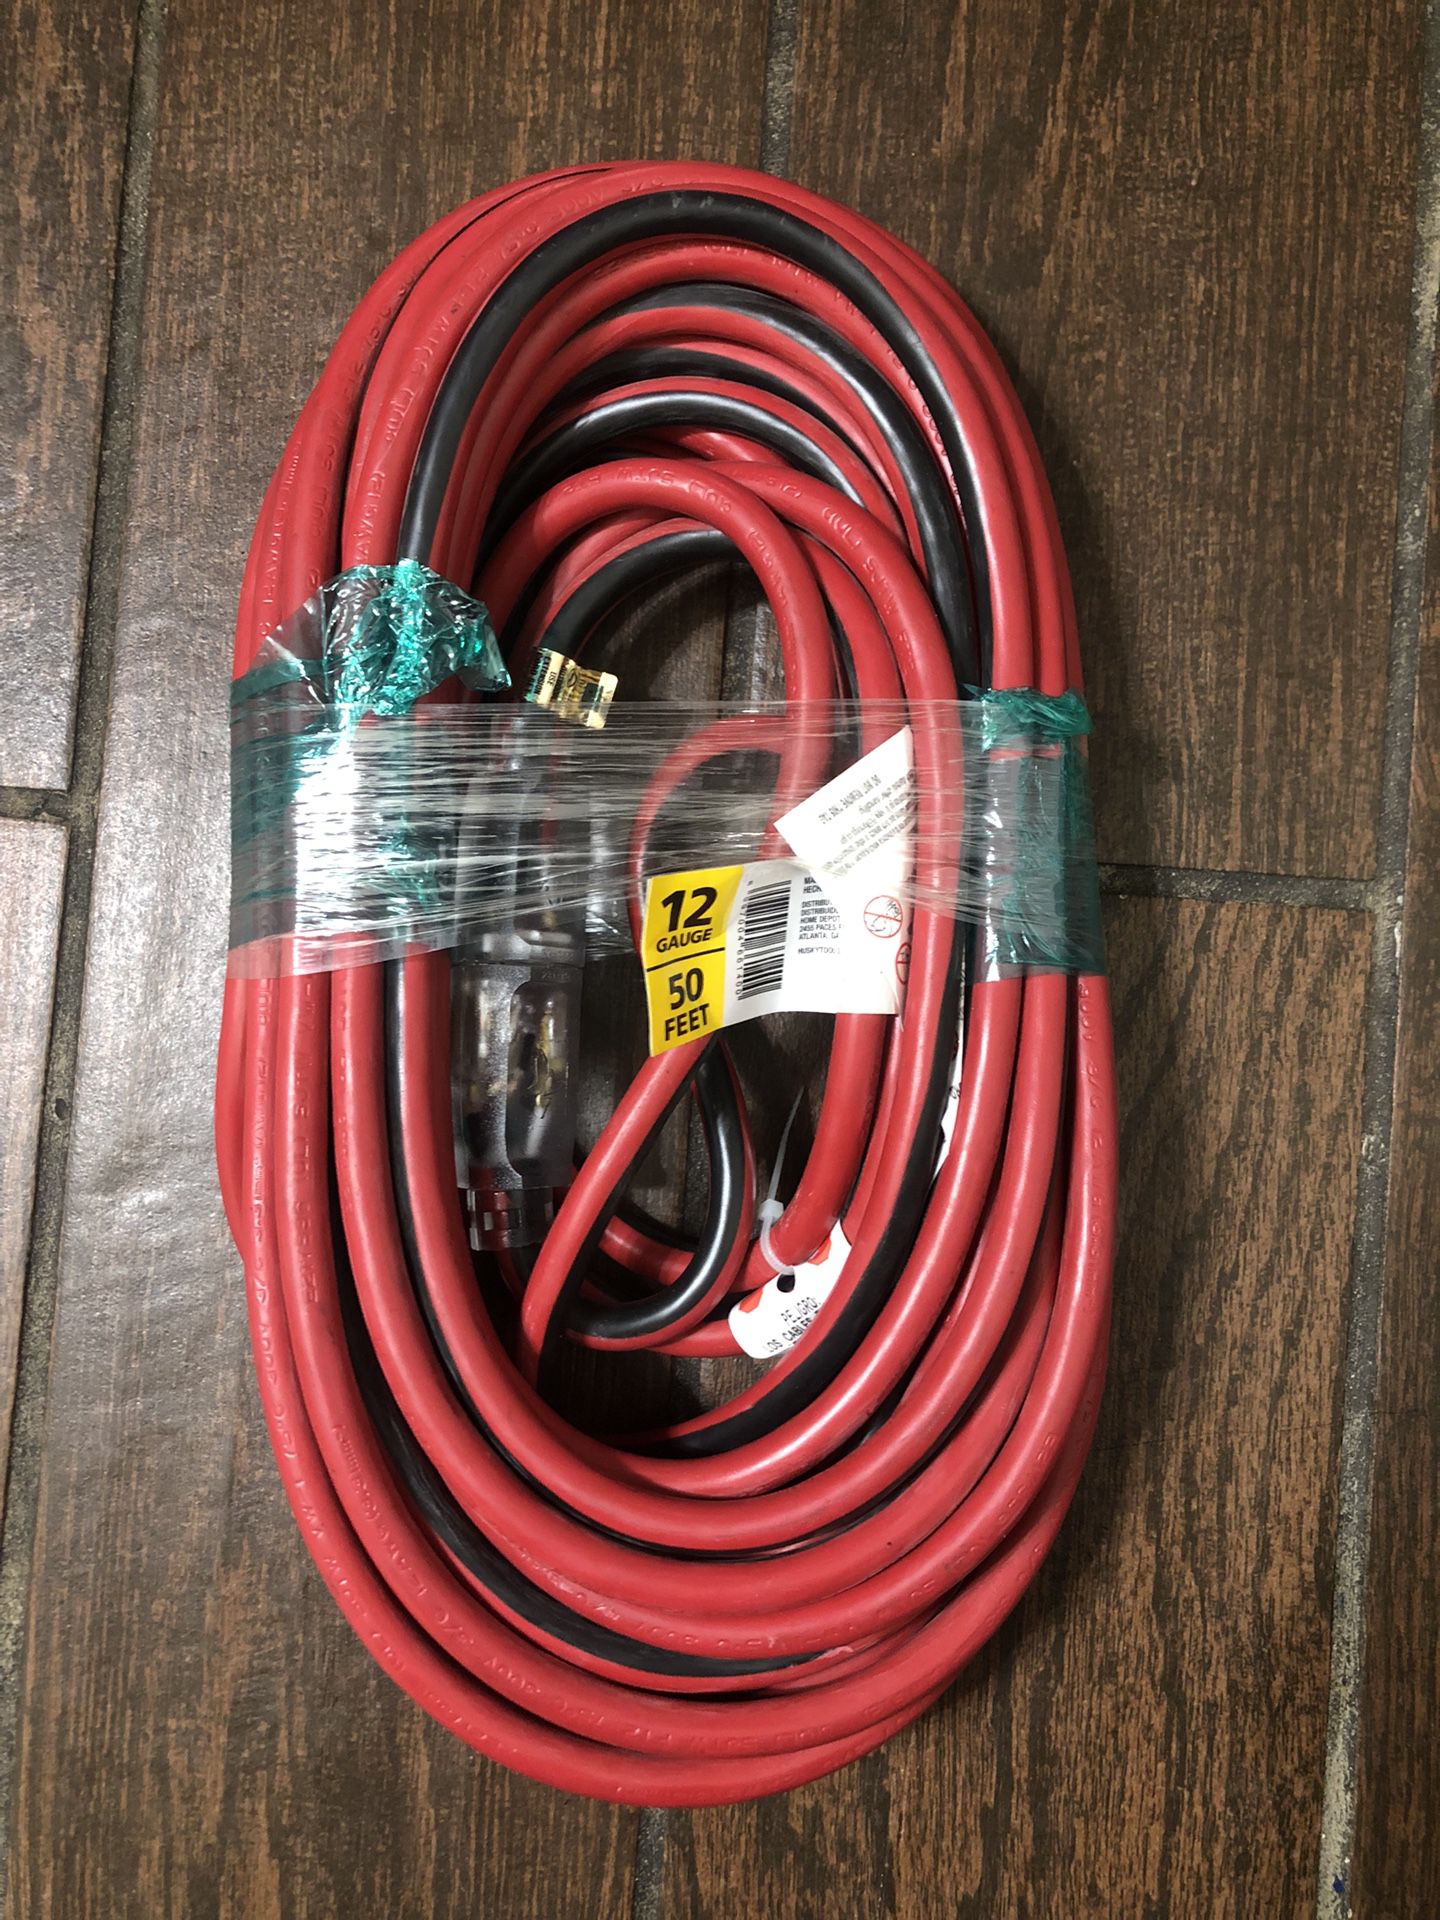 BRAND NEW Husky 50 Foot 12 Gauge Extension Cord! L@@K! Heavy Duty! Great For Job sites!